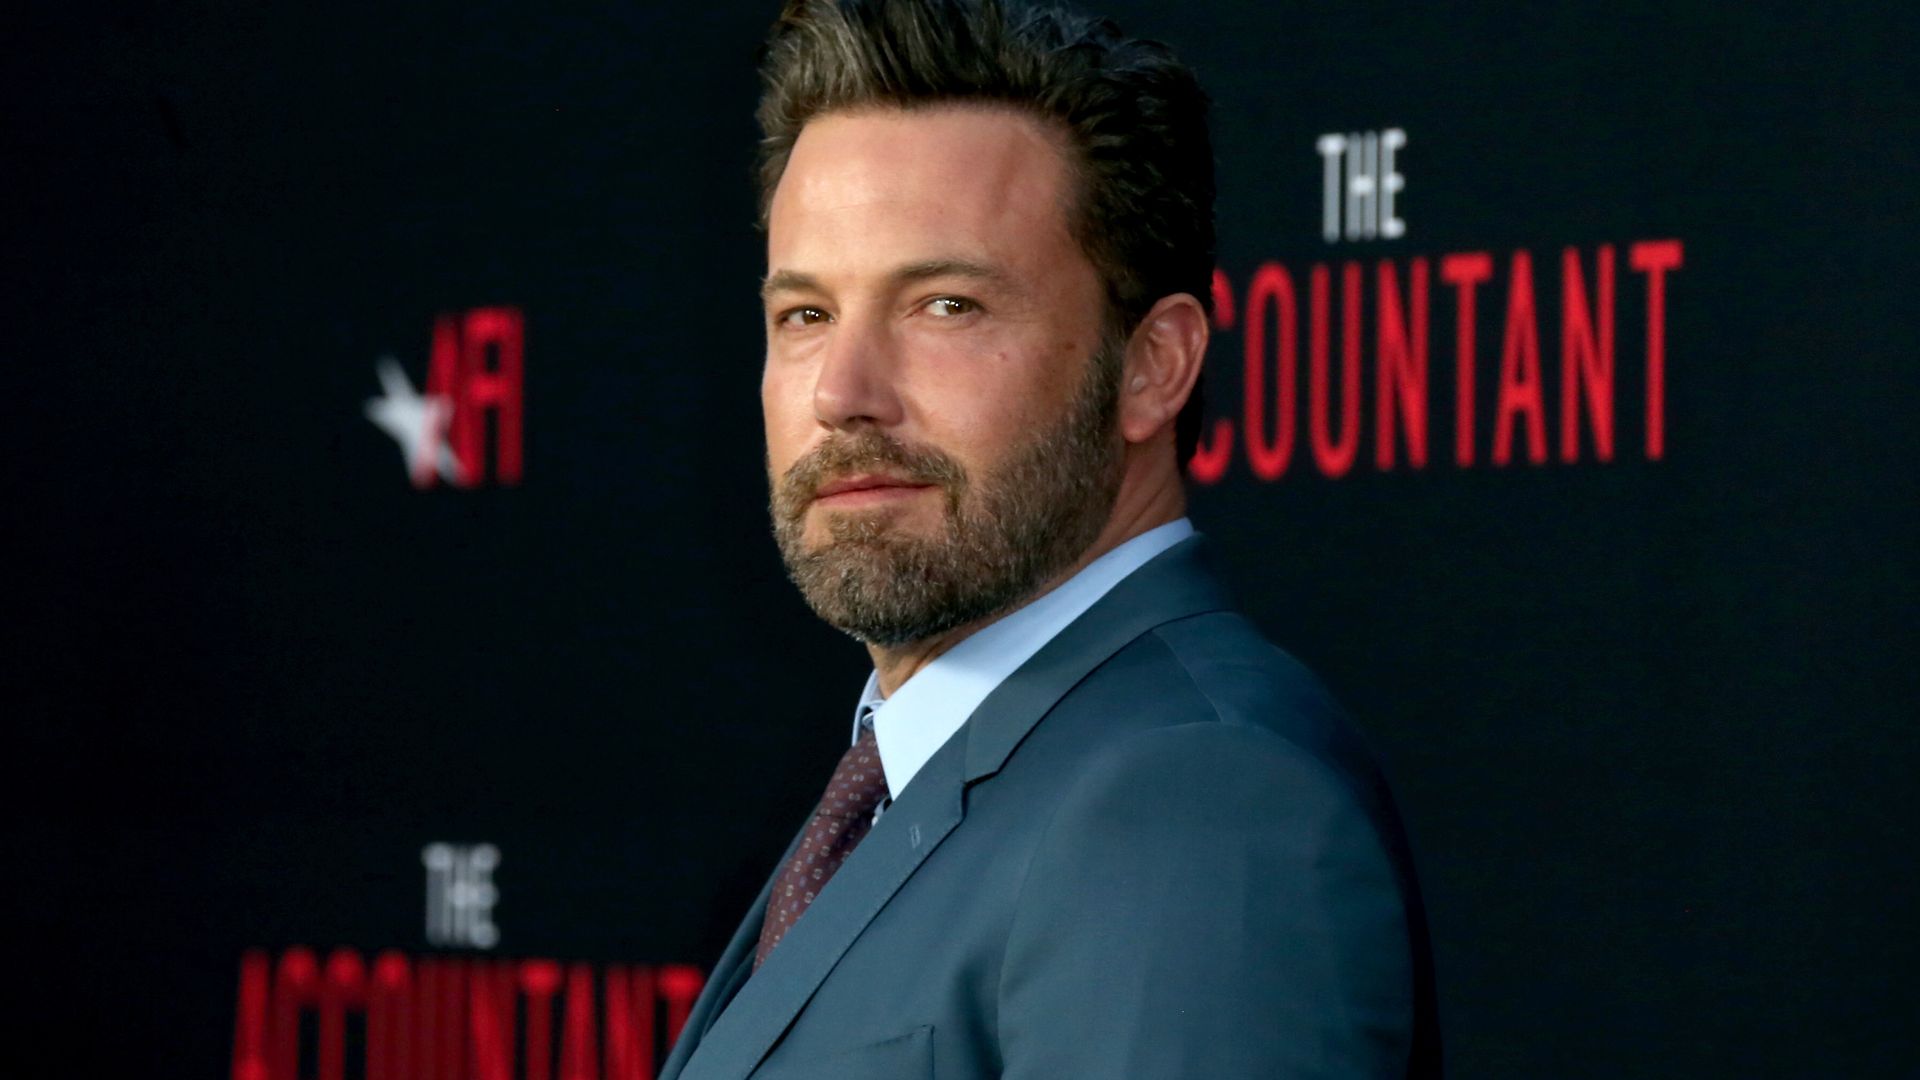 All the times Ben Affleck went viral for the wrong reasons